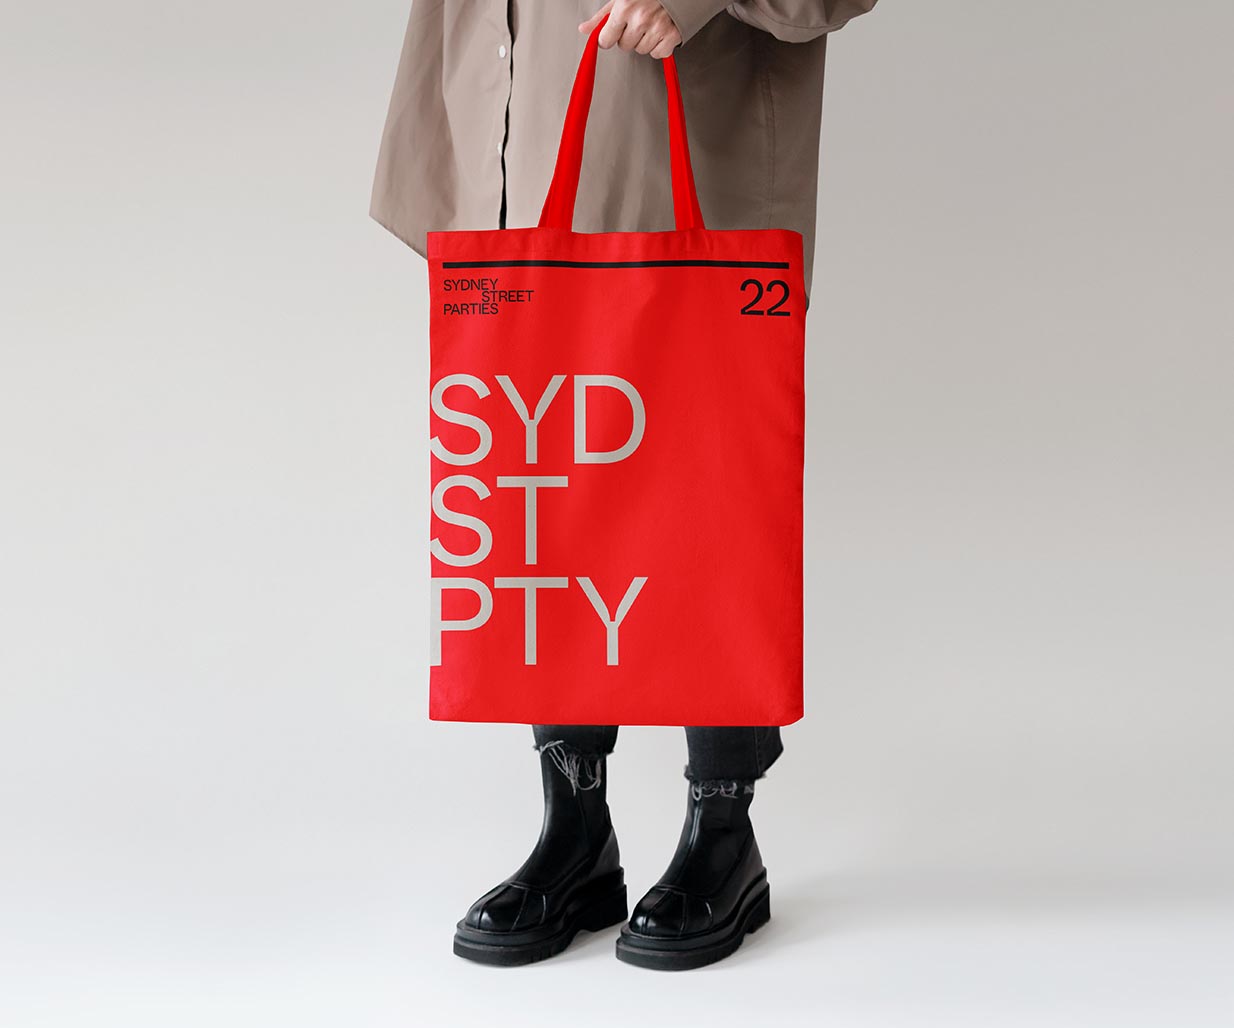 Branding Services for Sydney Street Party, where Percept were among the Branding Agencies selected for this design pitch, image I